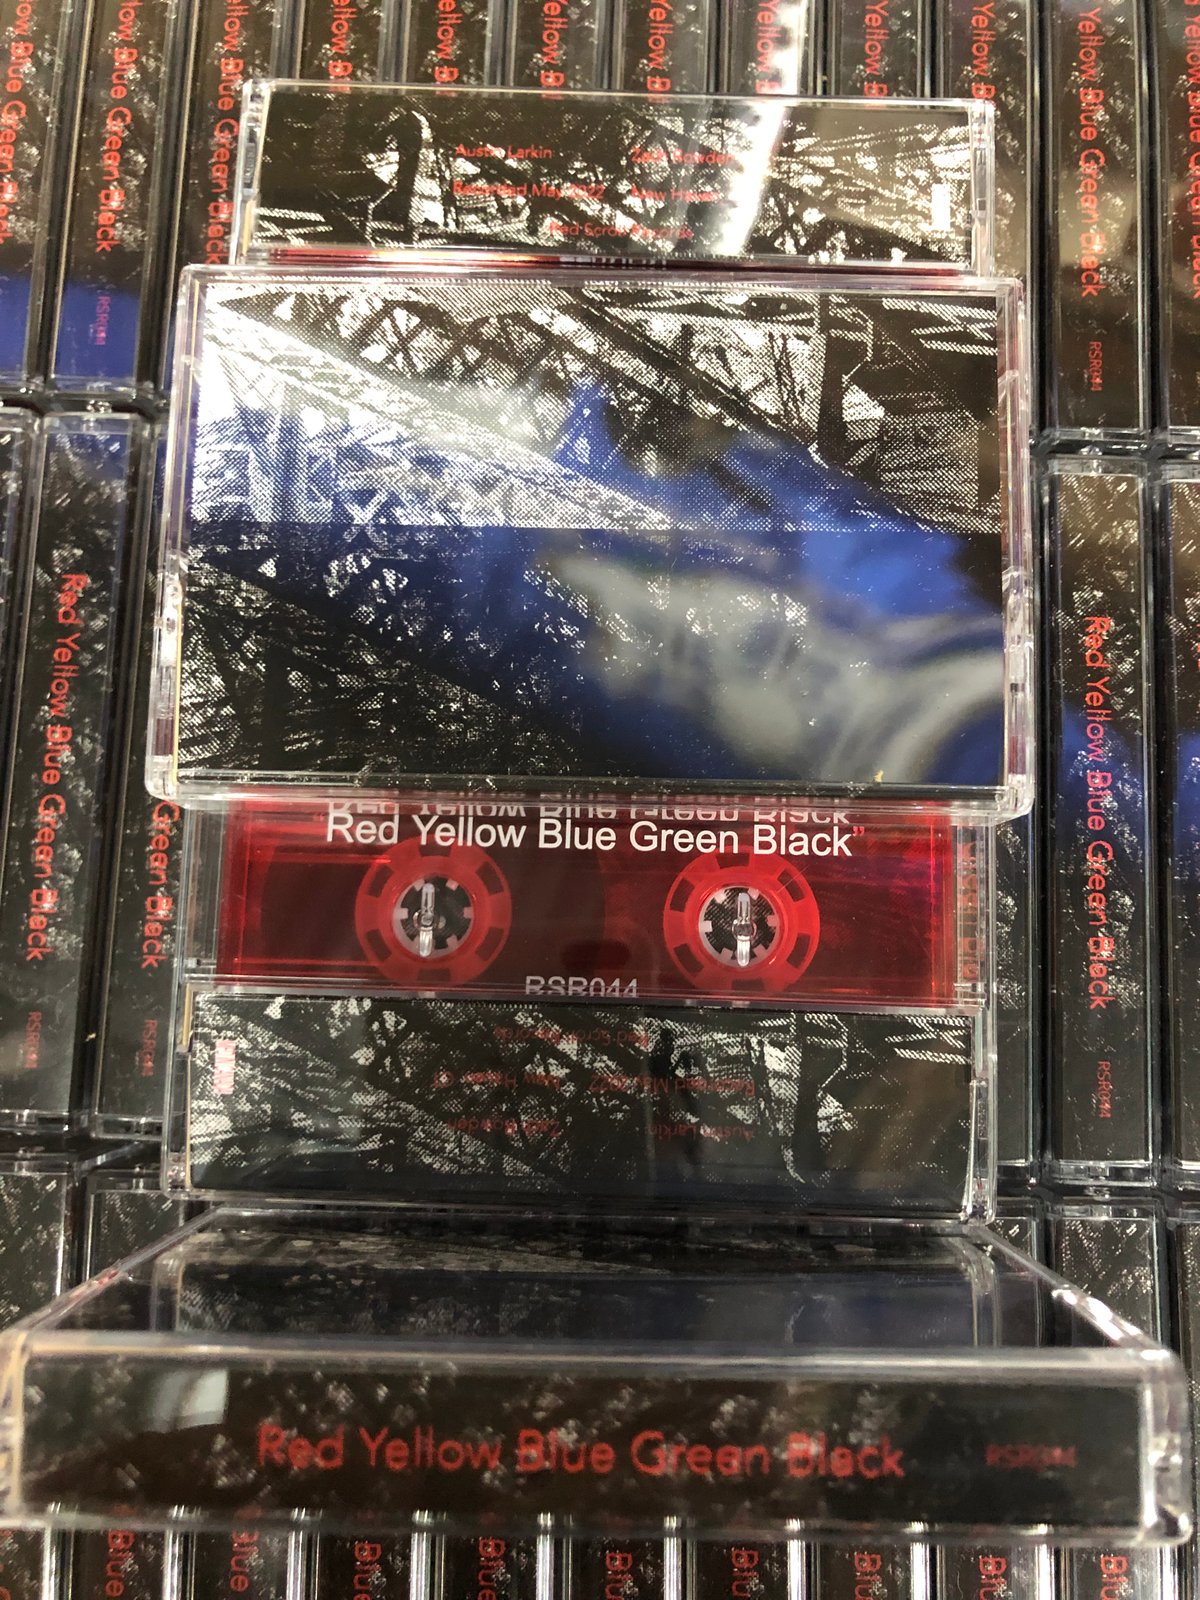 Image of [RSR044] Red Yellow Blue Green Black (self-titled) Cassette